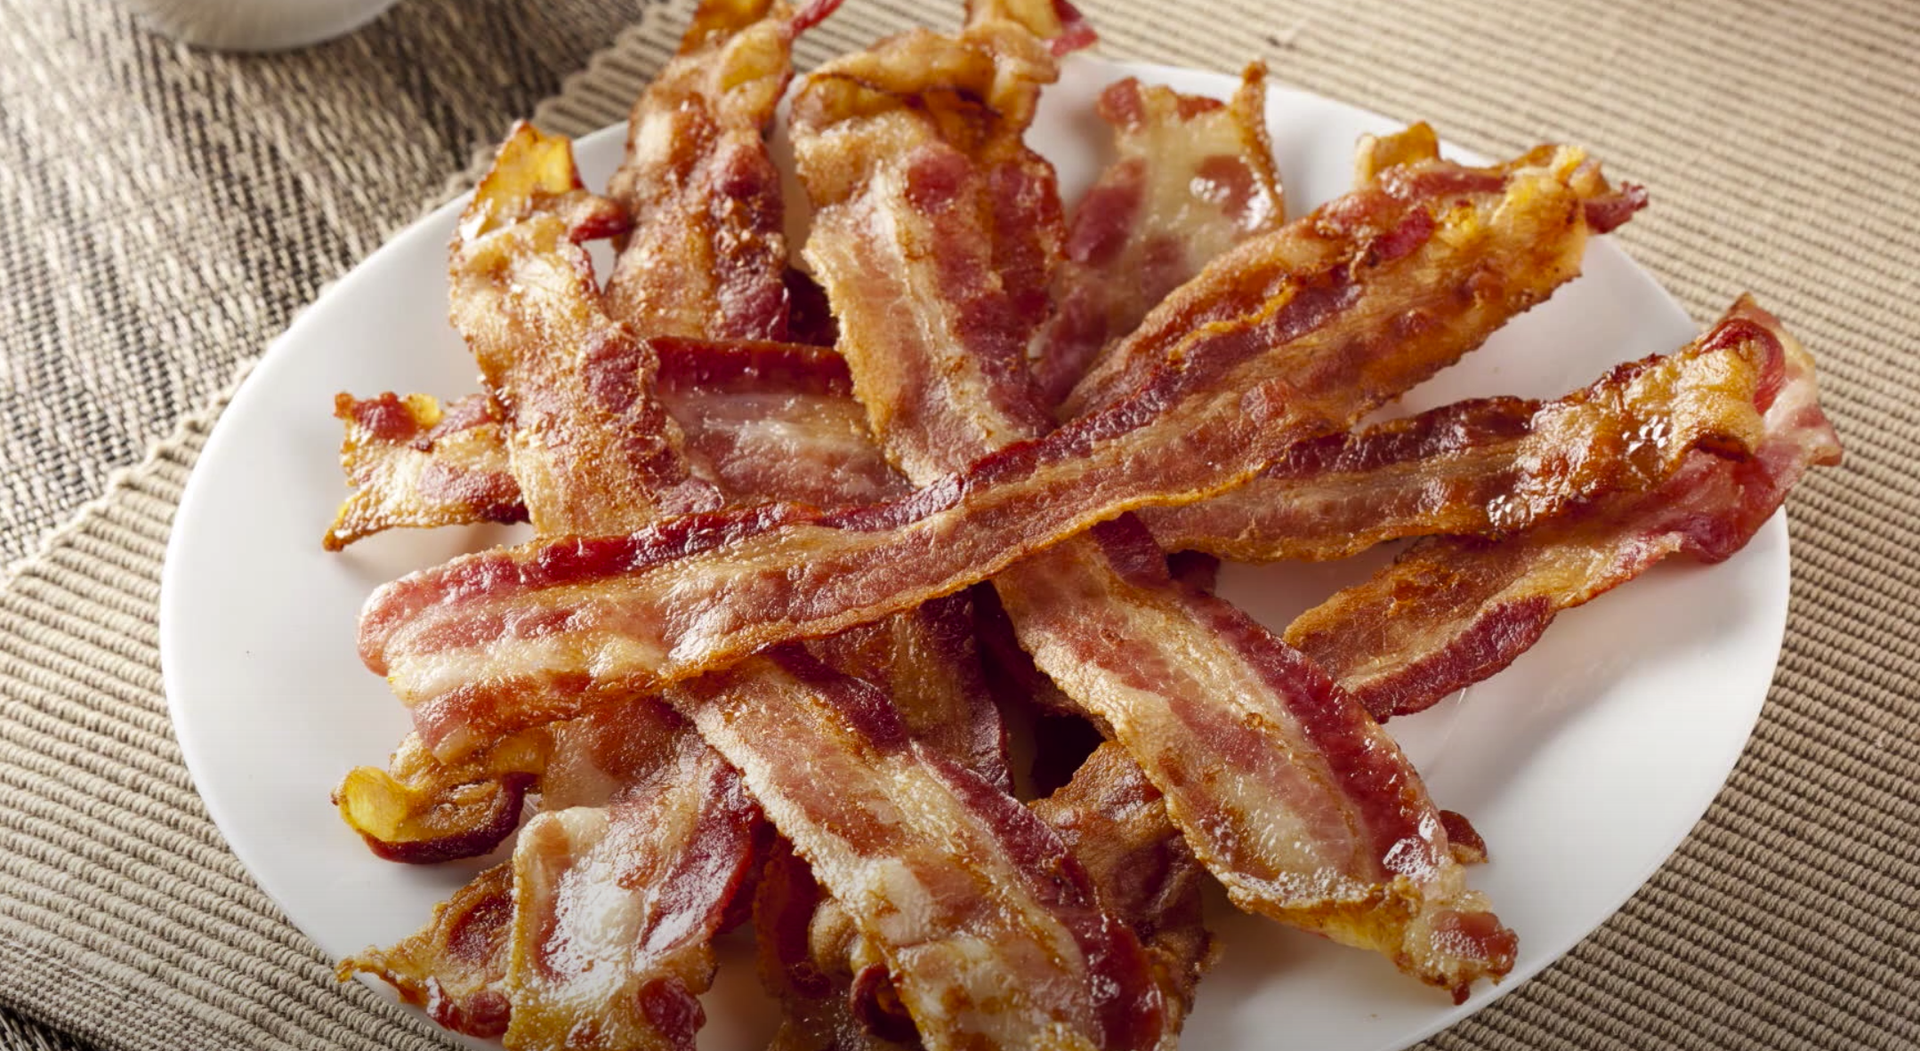 Why Is Bacon Considered A Breakfast Food?